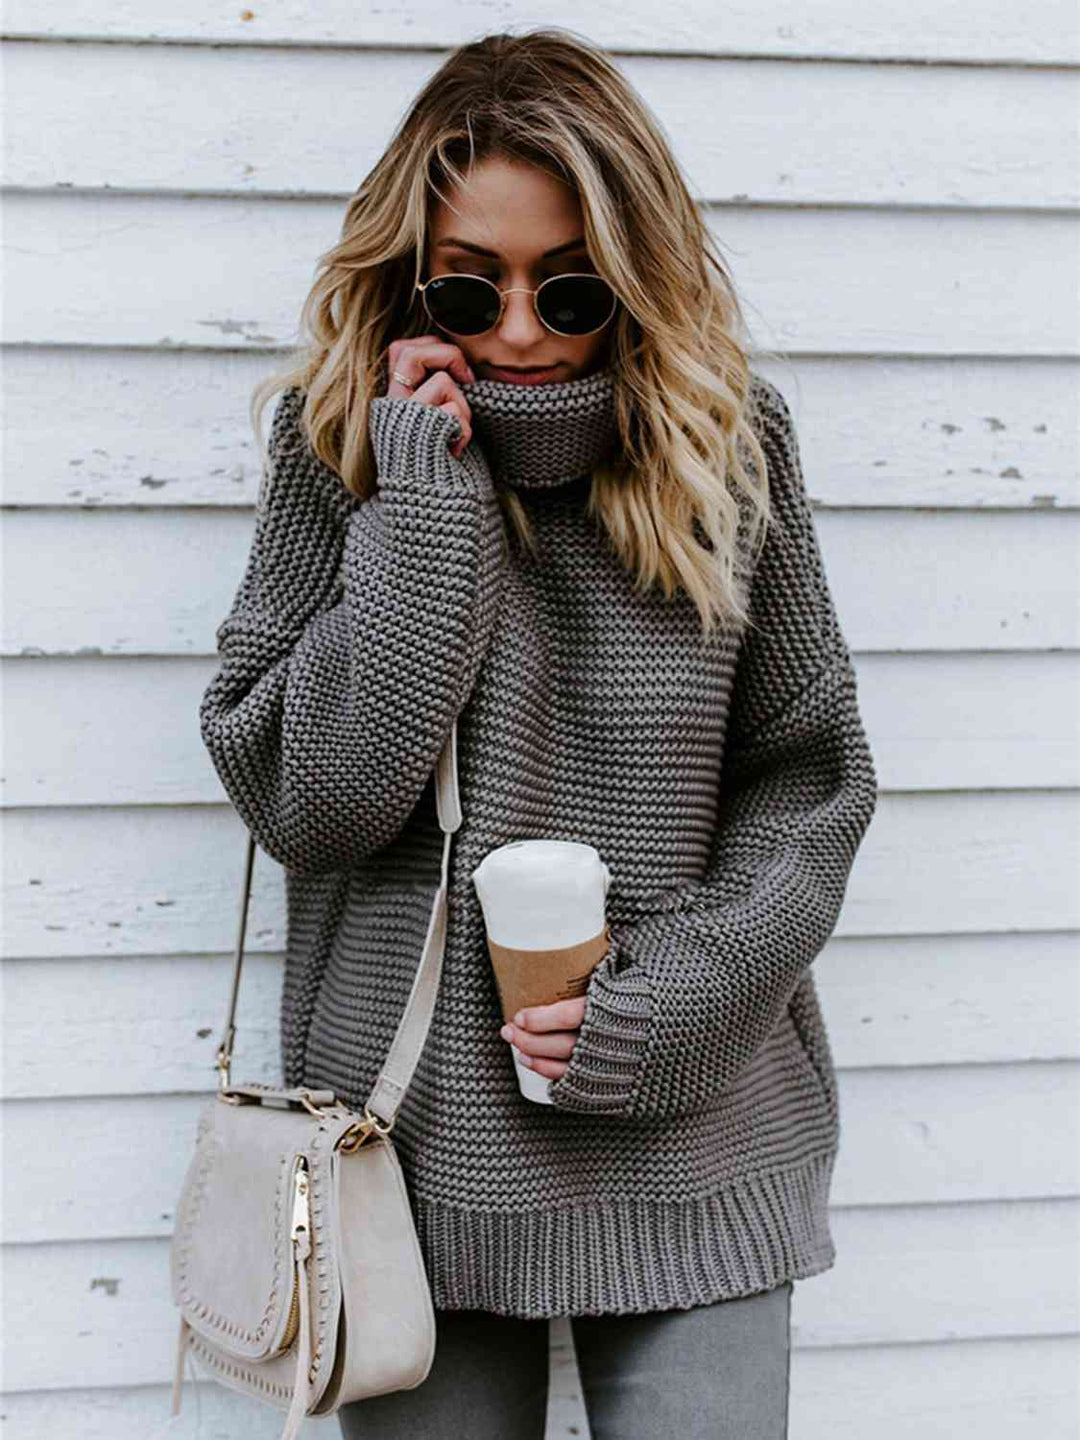 The802Gypsy sweater GYPSY-Turtleneck Dropped Shoulder Sweater